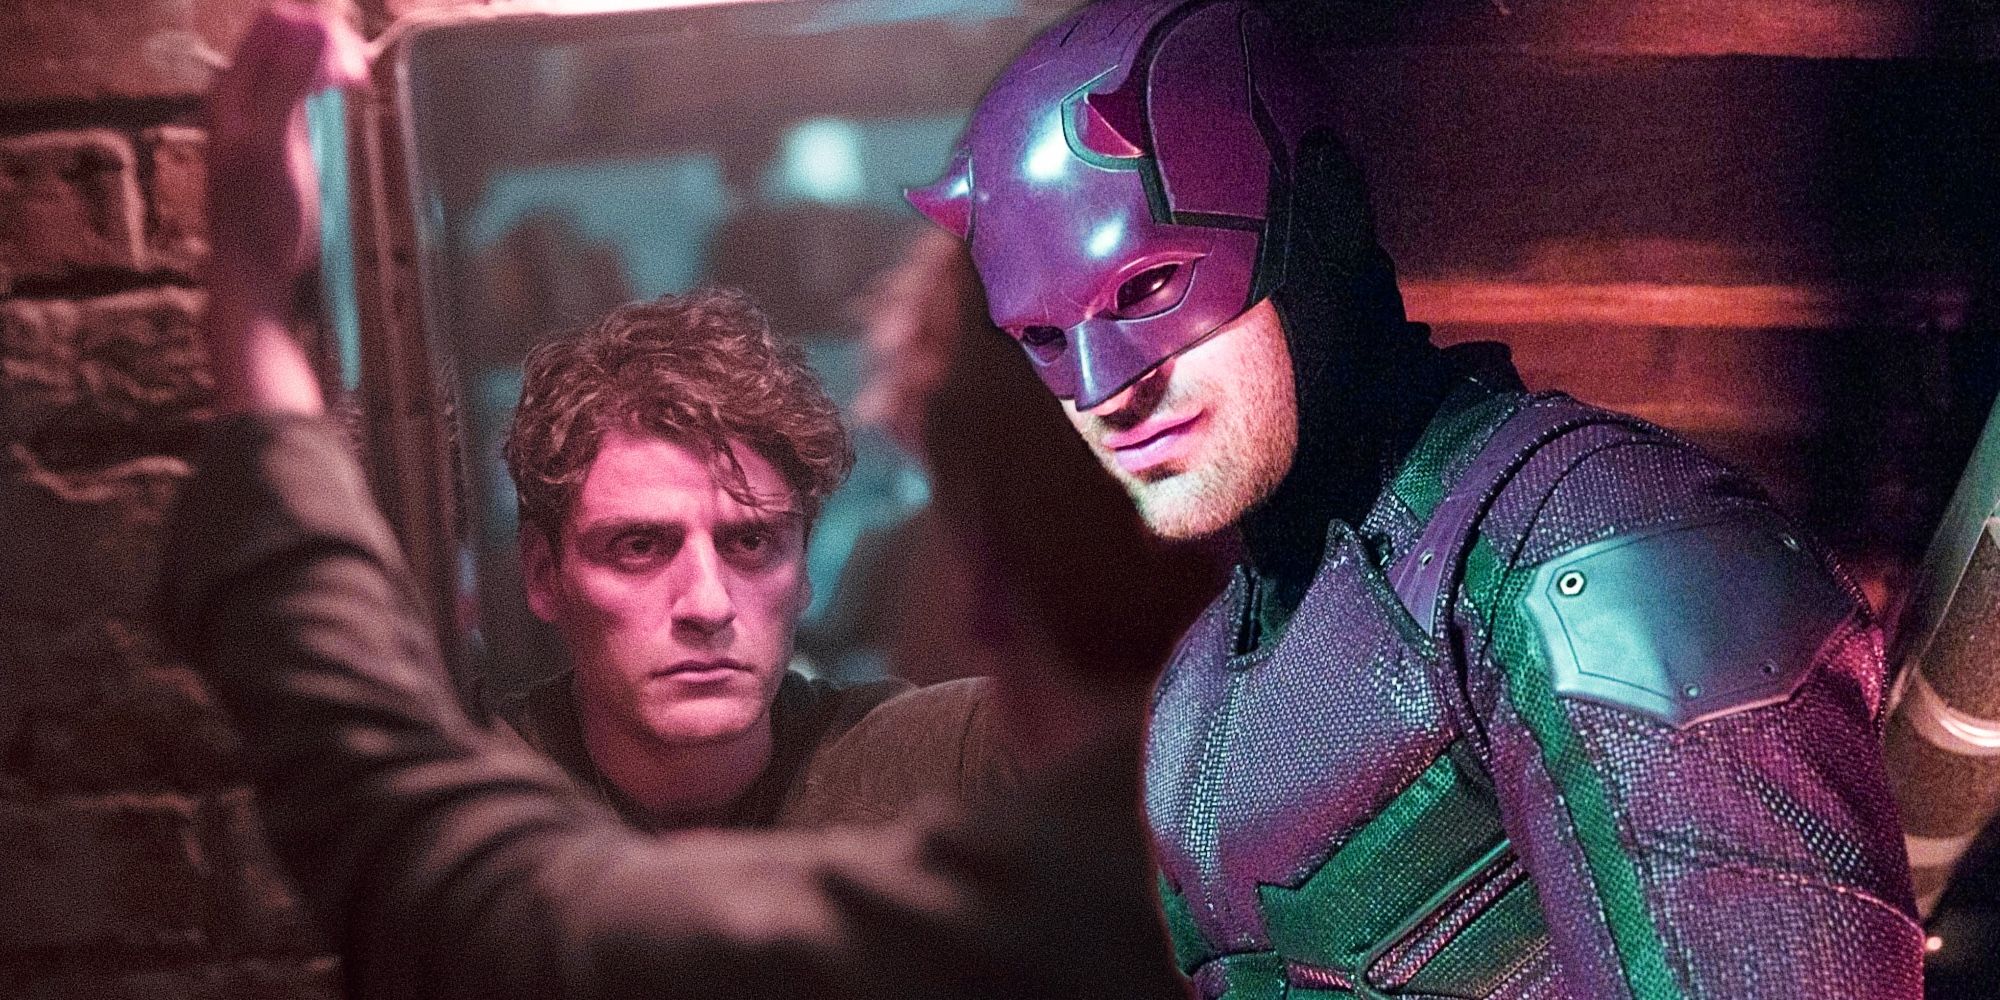 mcu phase 4 has already revealed daredevil's perfect reboot plan